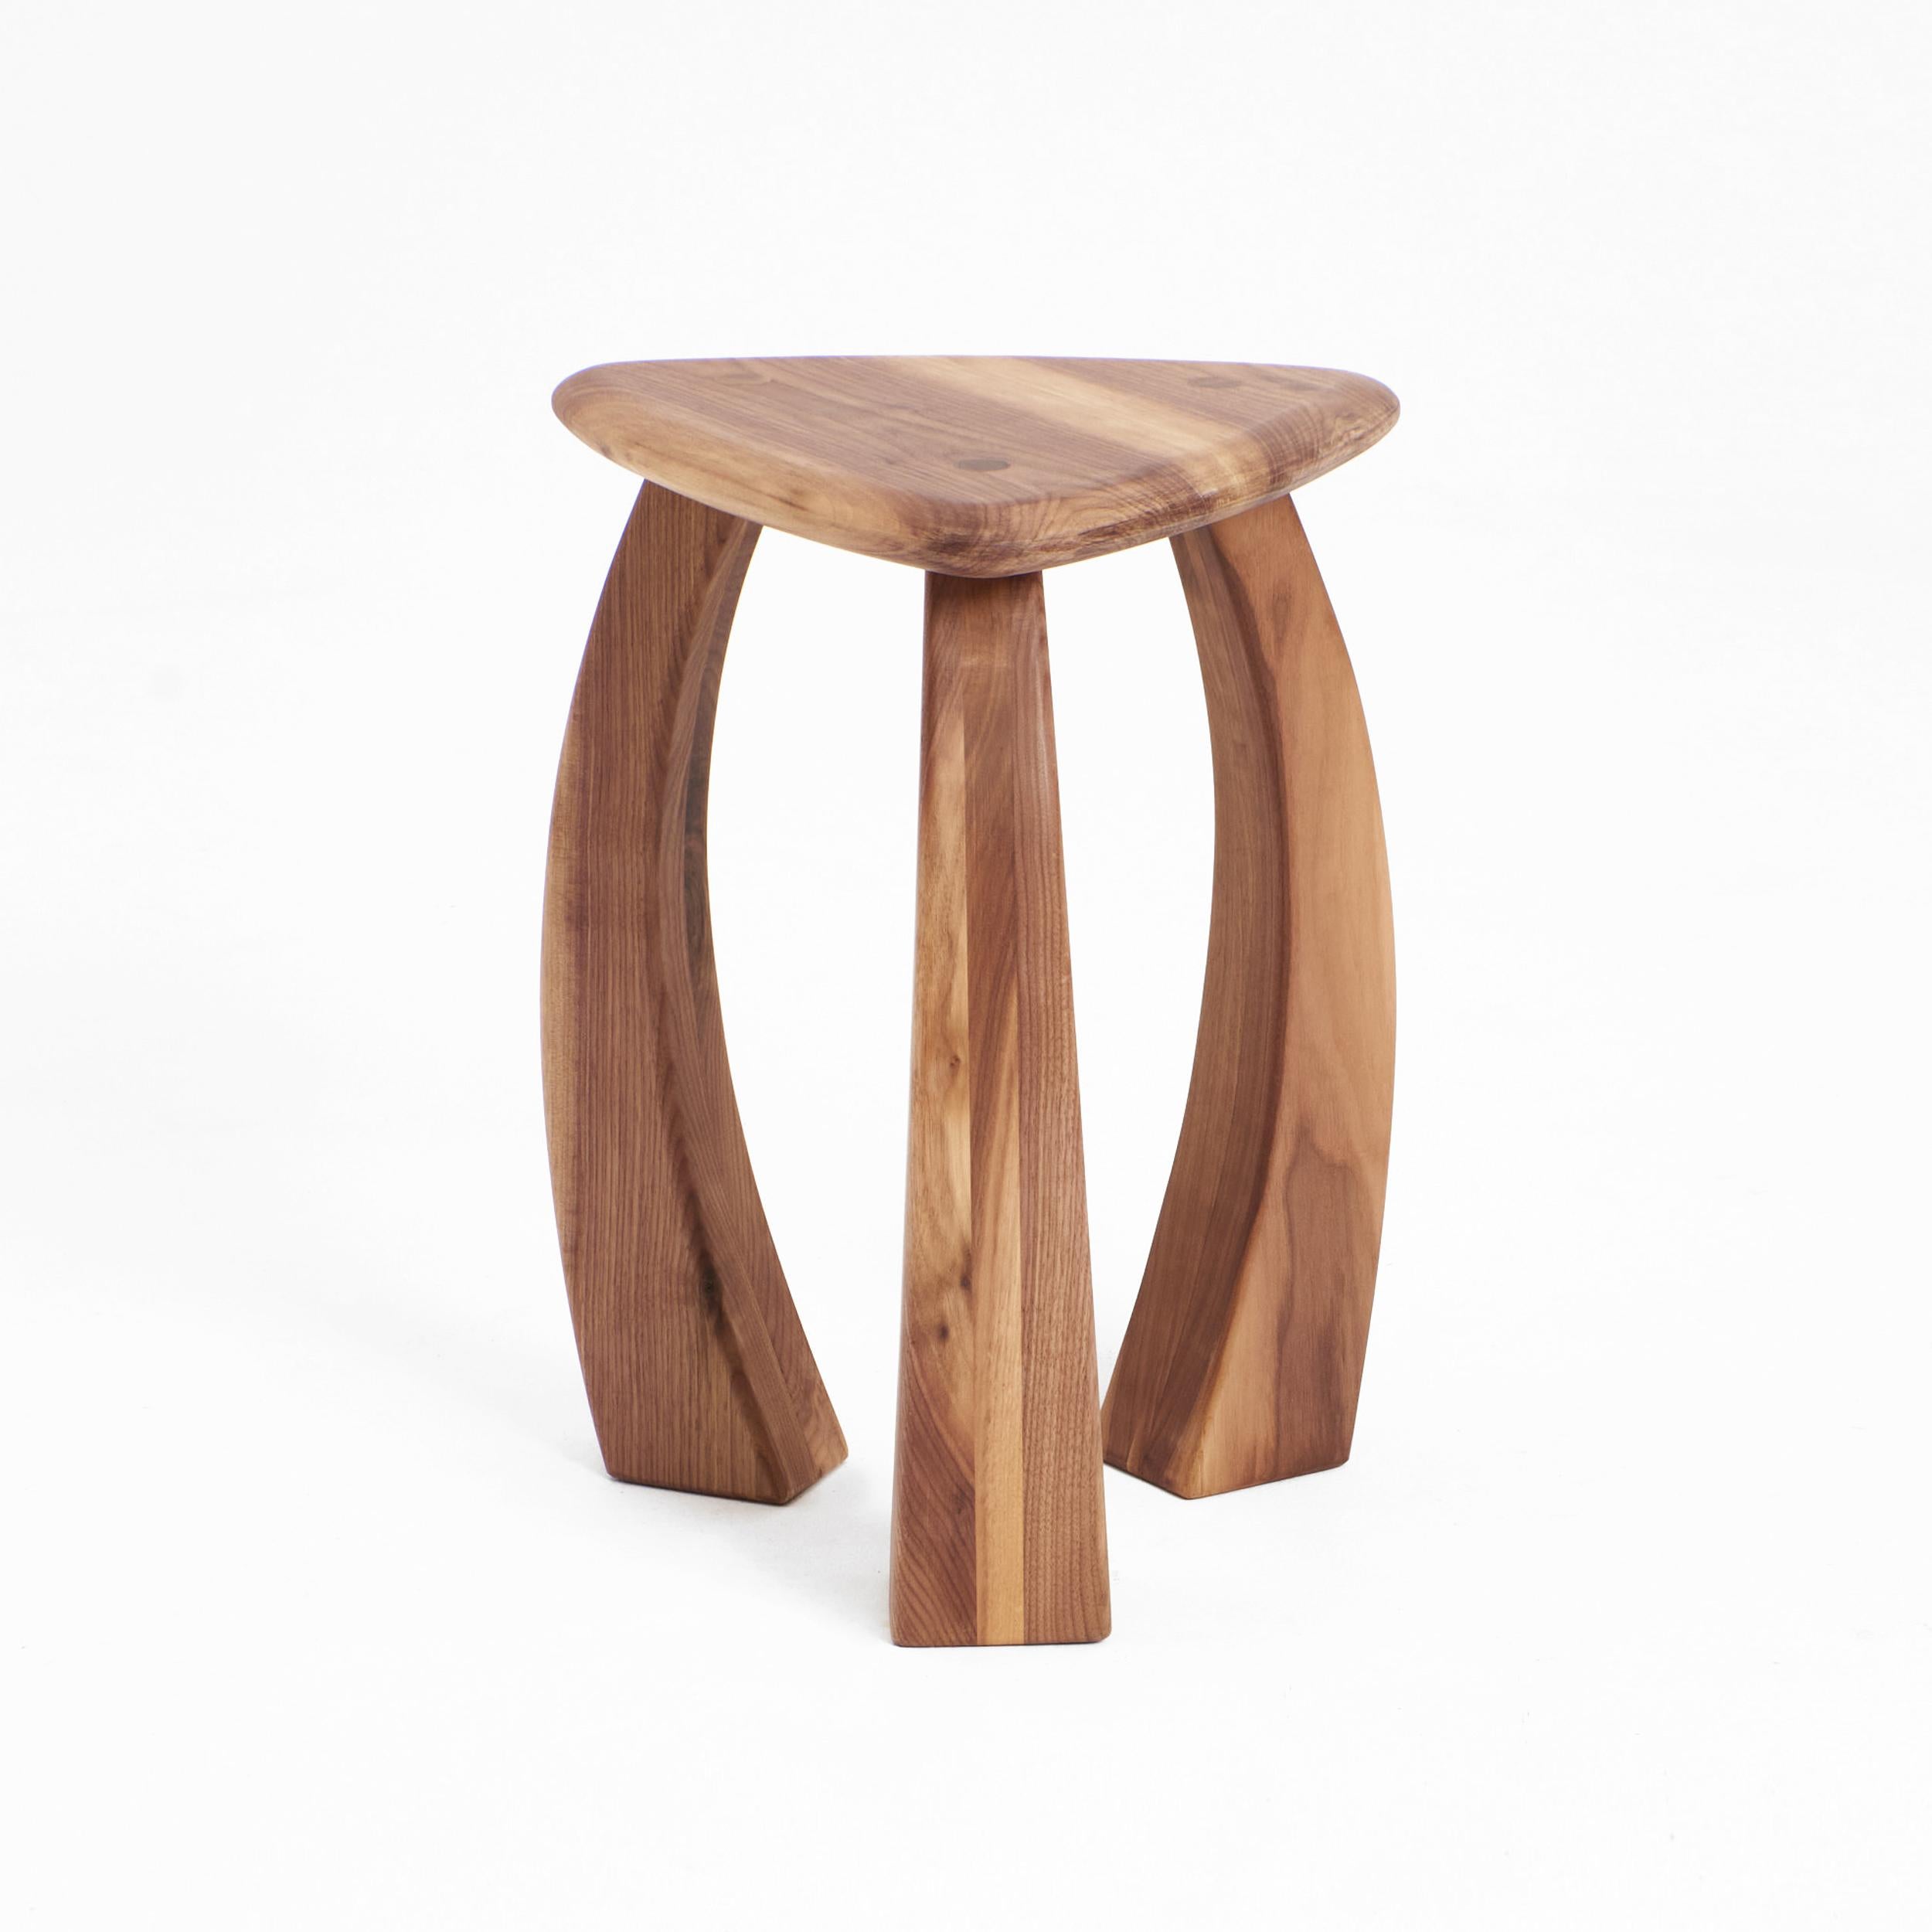 Arc de Stool '52
Designed by Project 213A in 2022

Side table in solid walnut with legs that arch inwards its triangular top. Carved by skilled artisans in northern Portugal.

Production lead time: 1-6 weeks depending on stock availability.